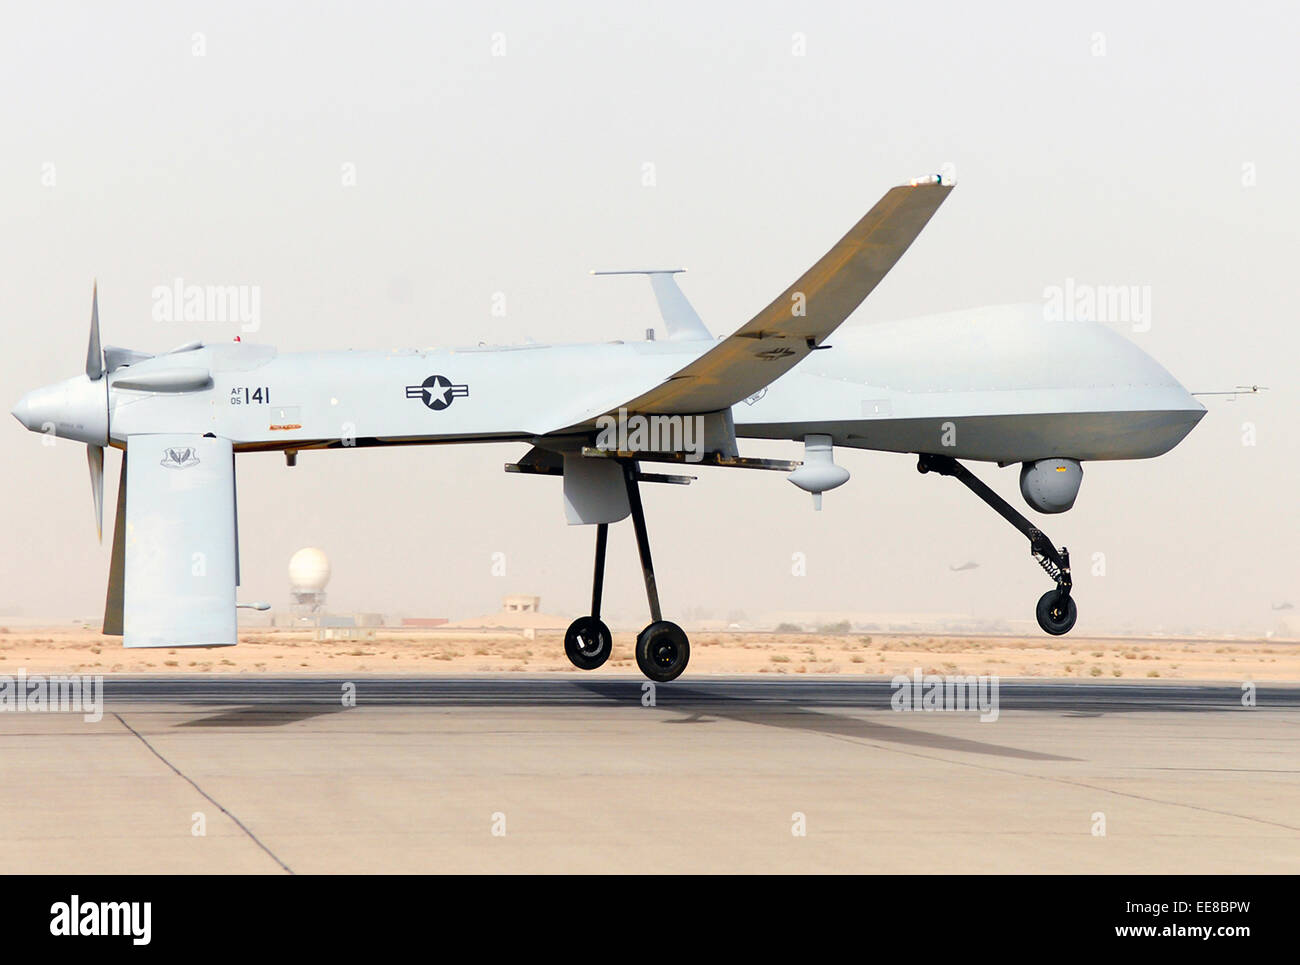 MQ-1 Predator unmanned aerial vehicle (UAV) takes off in Southwest Asia. See description for more information. Stock Photo